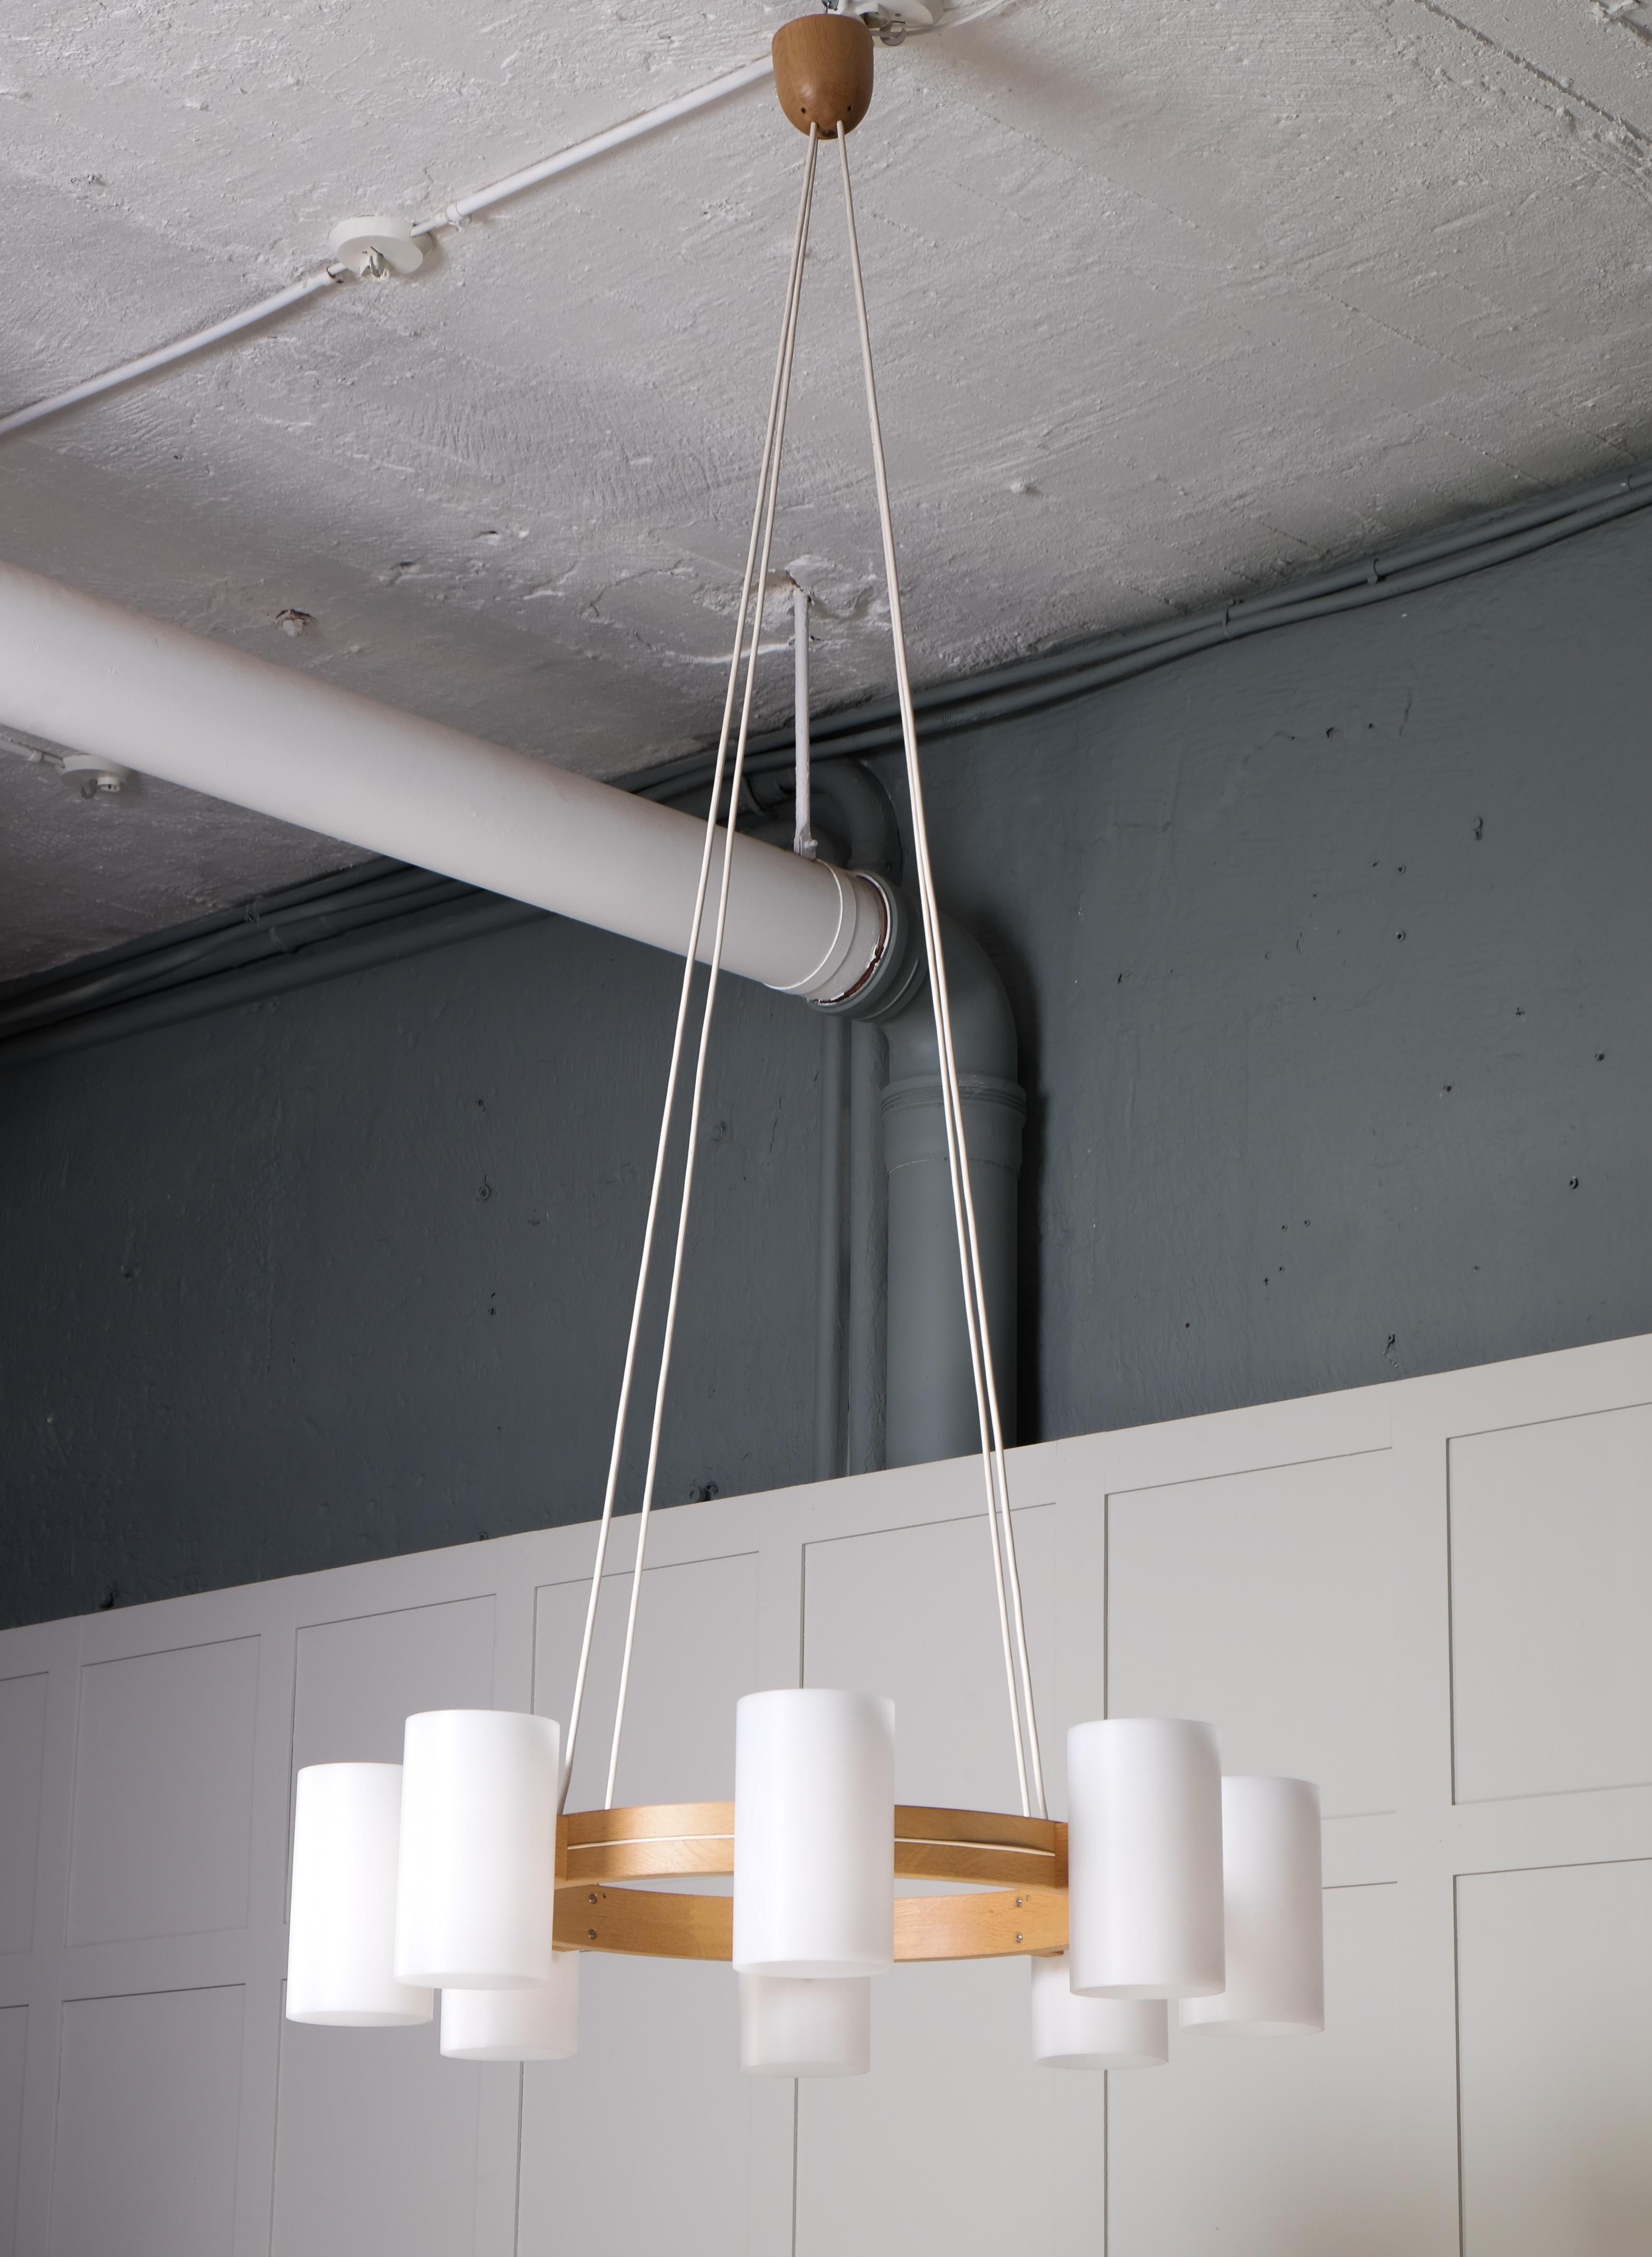 Set of 6 Chandeliers by Uno & Östen Kristiansson for Luxus, 1960s For Sale 3